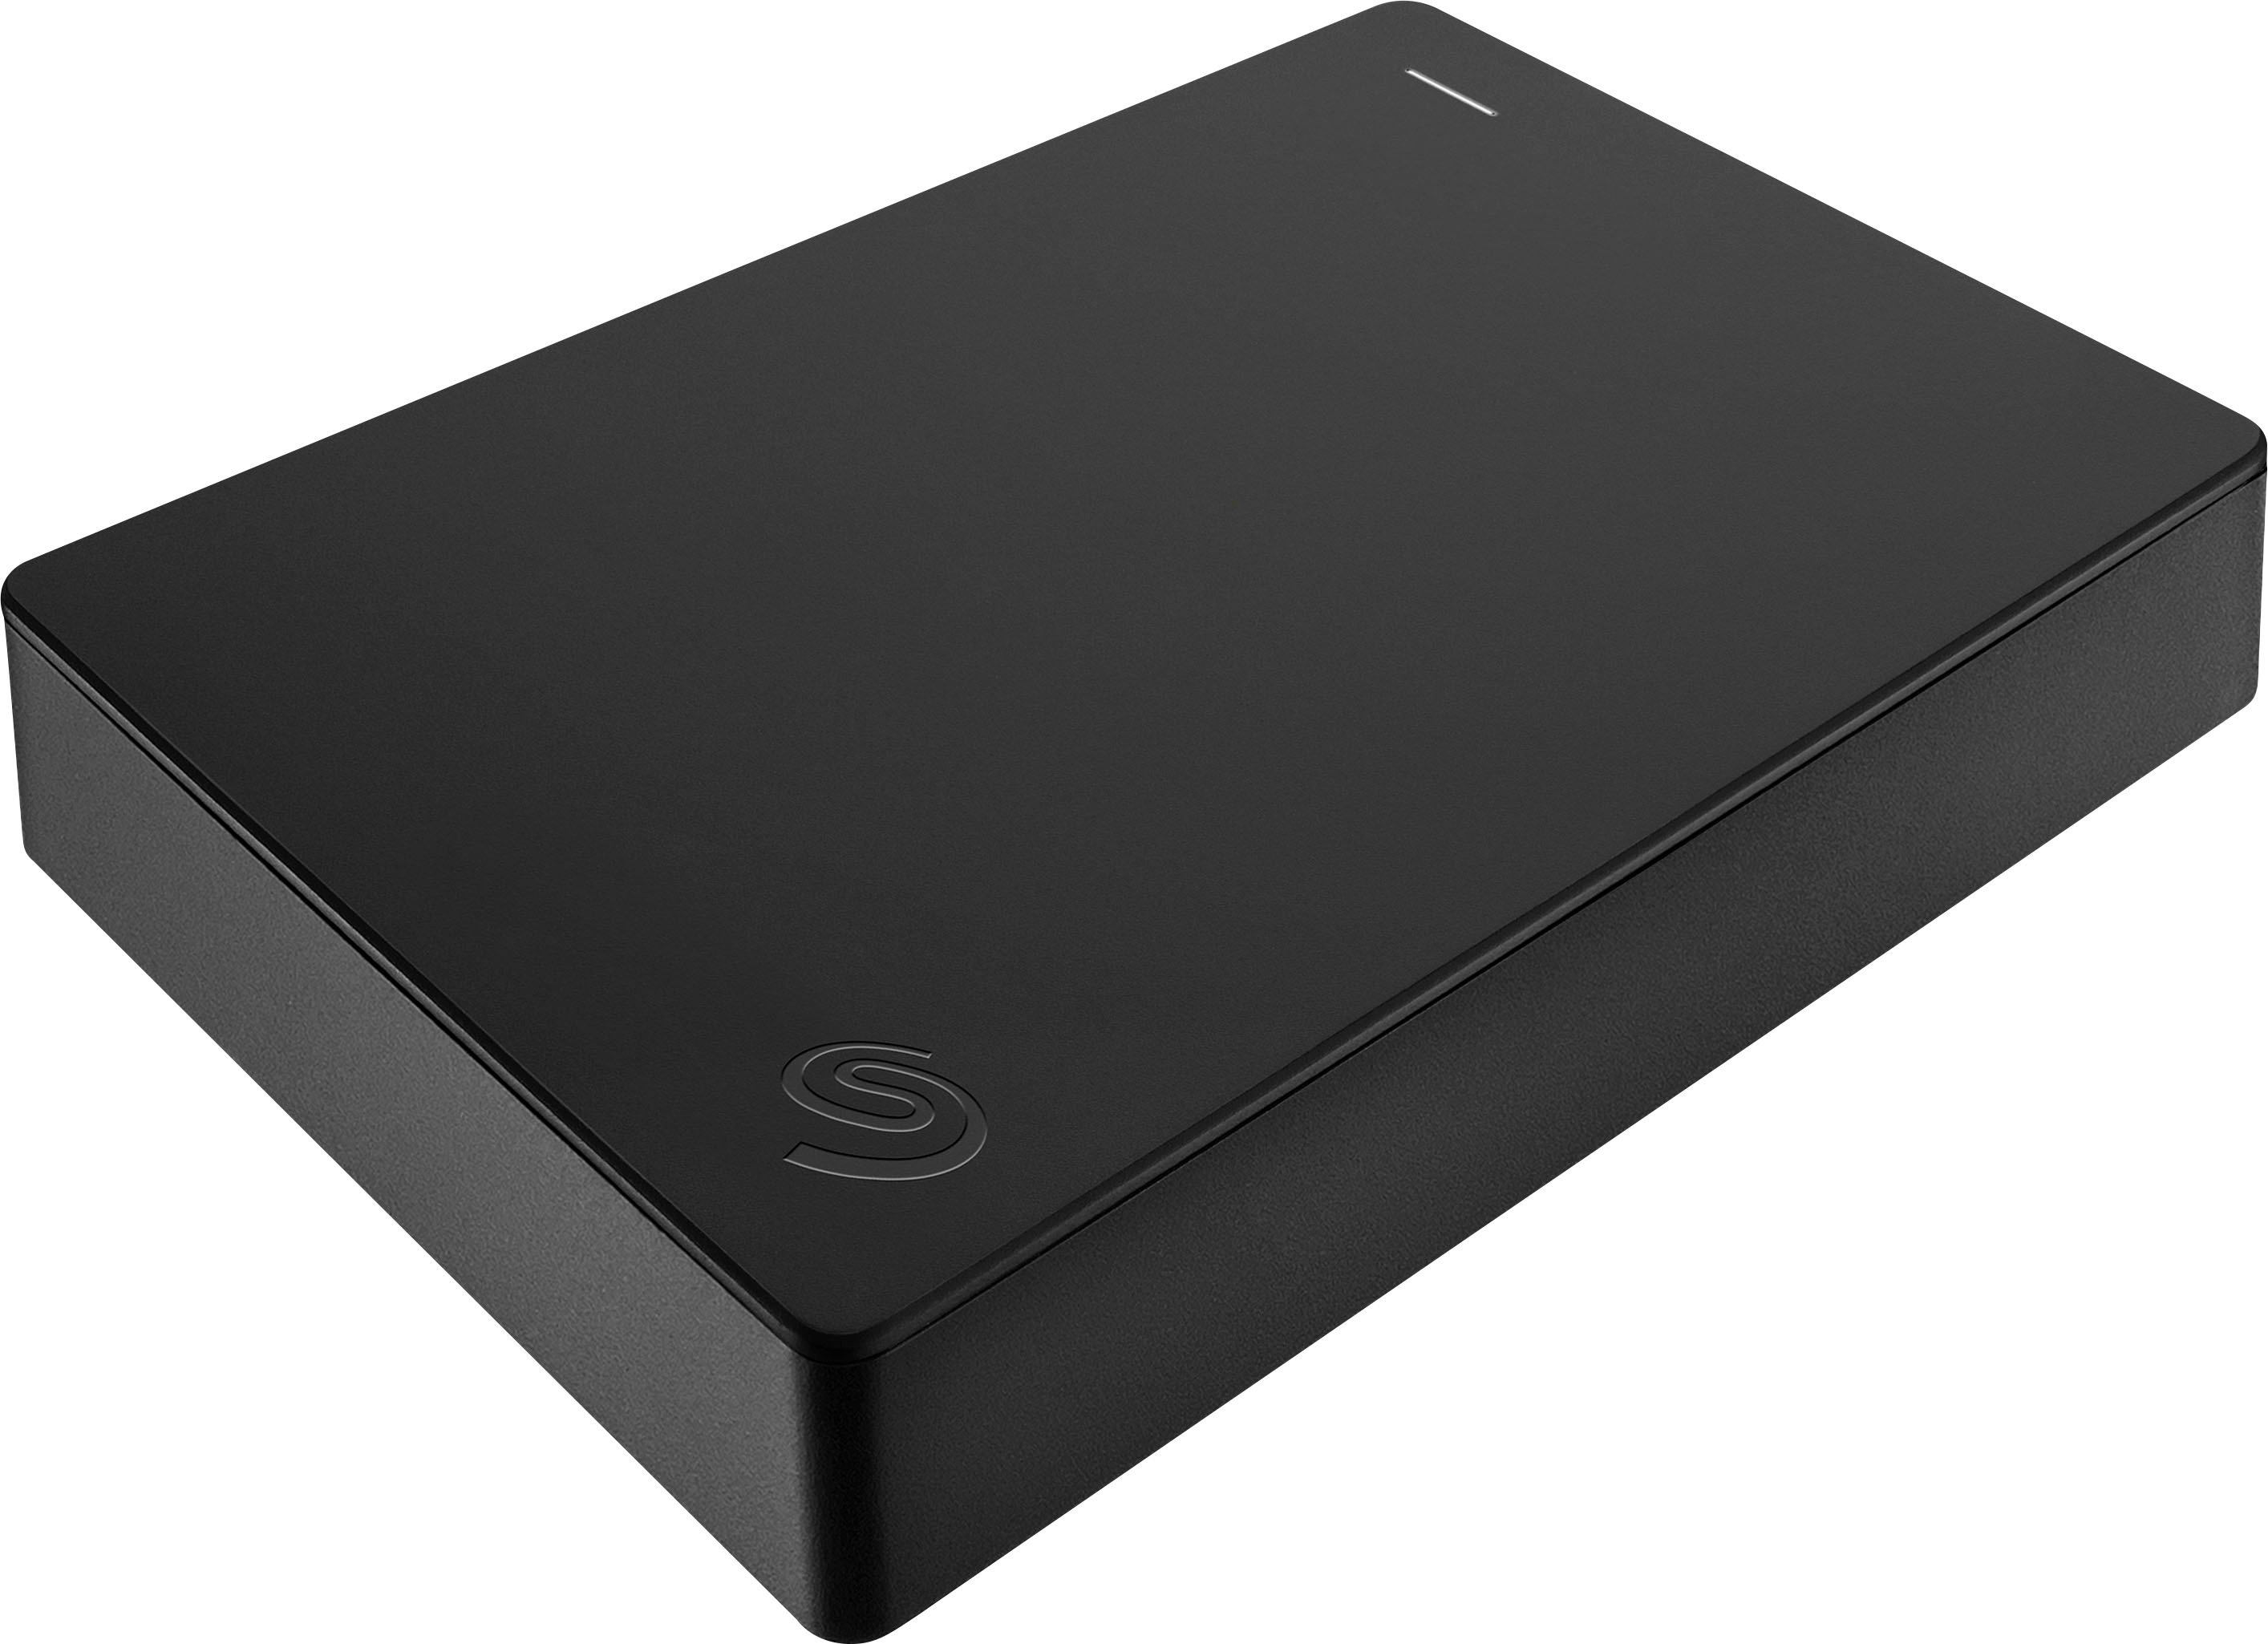 Seagate 4TB External USB 3.0 Portable Hard Drive with Rescue Data